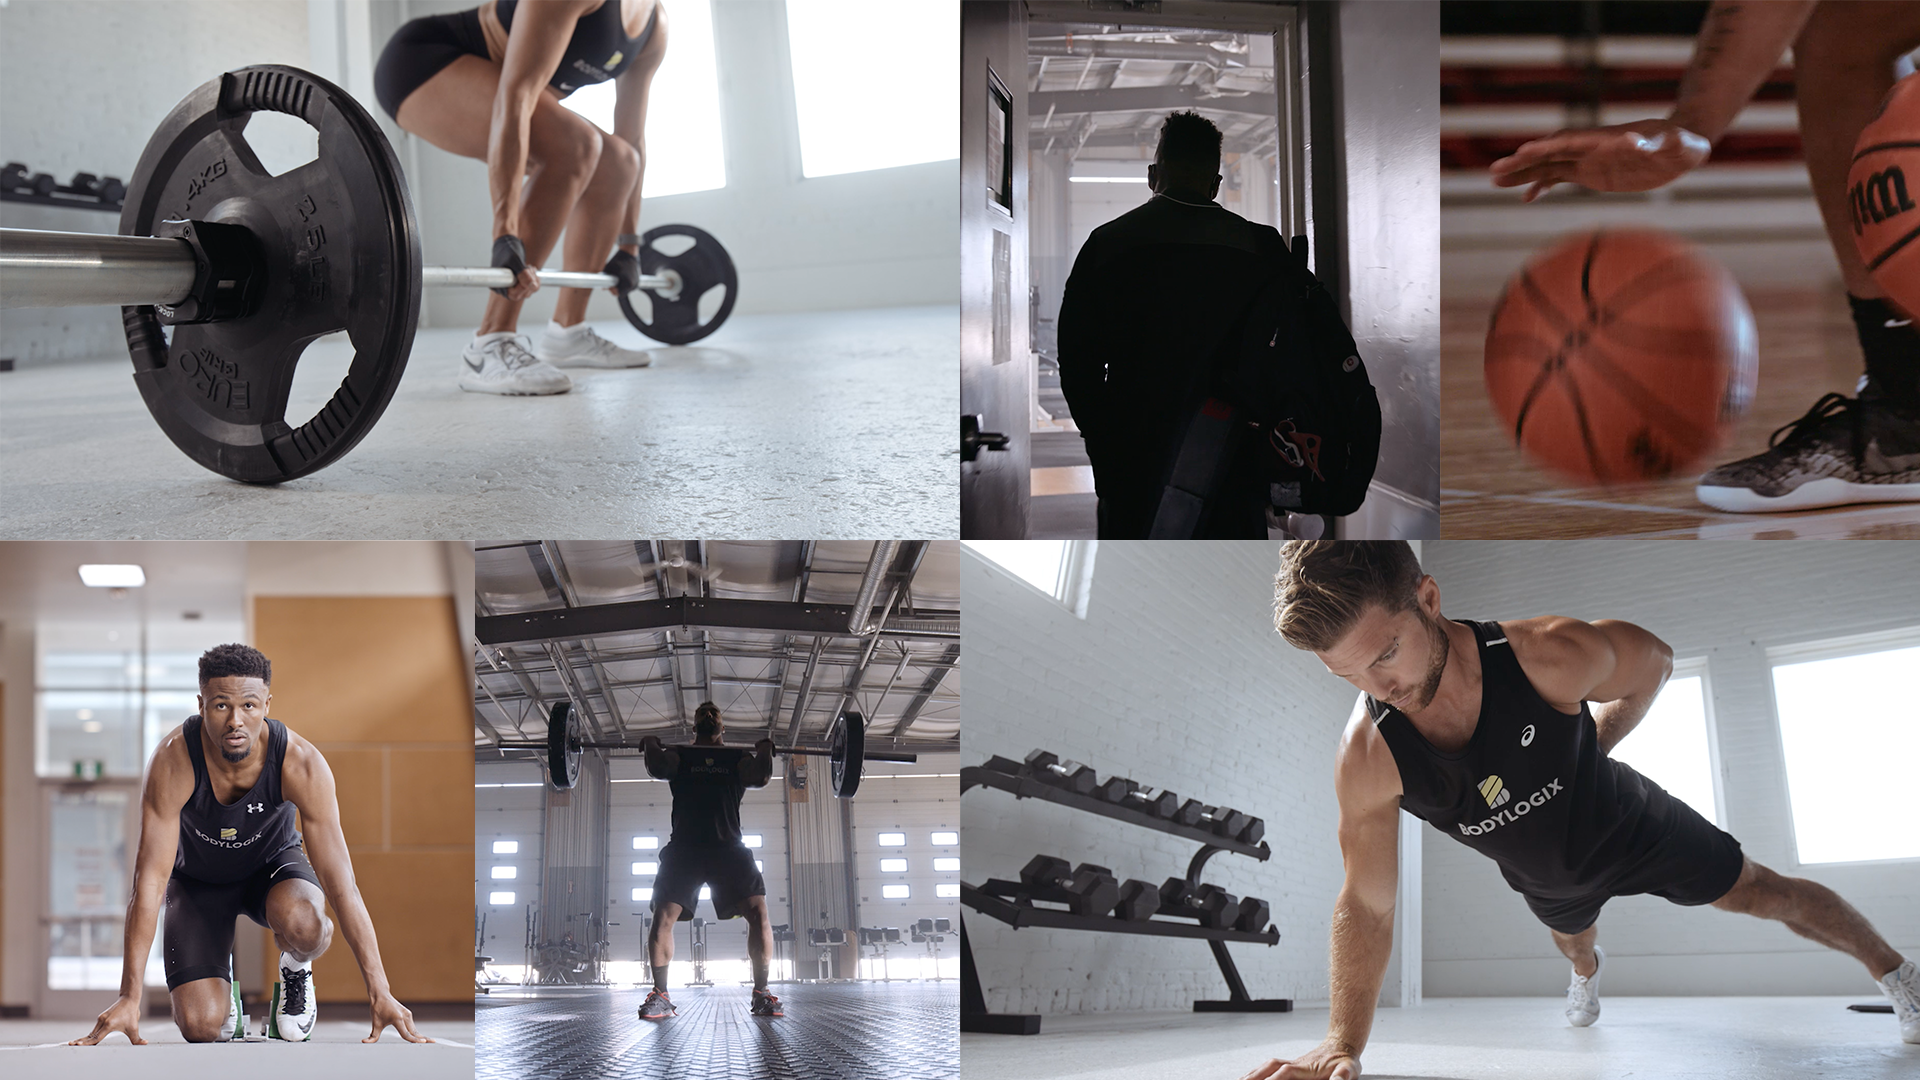 A collage of style frame images featuring a man at a starting line, a man lifting a barbell, a man dribbling a basketball and a man doing one-armed pushups.